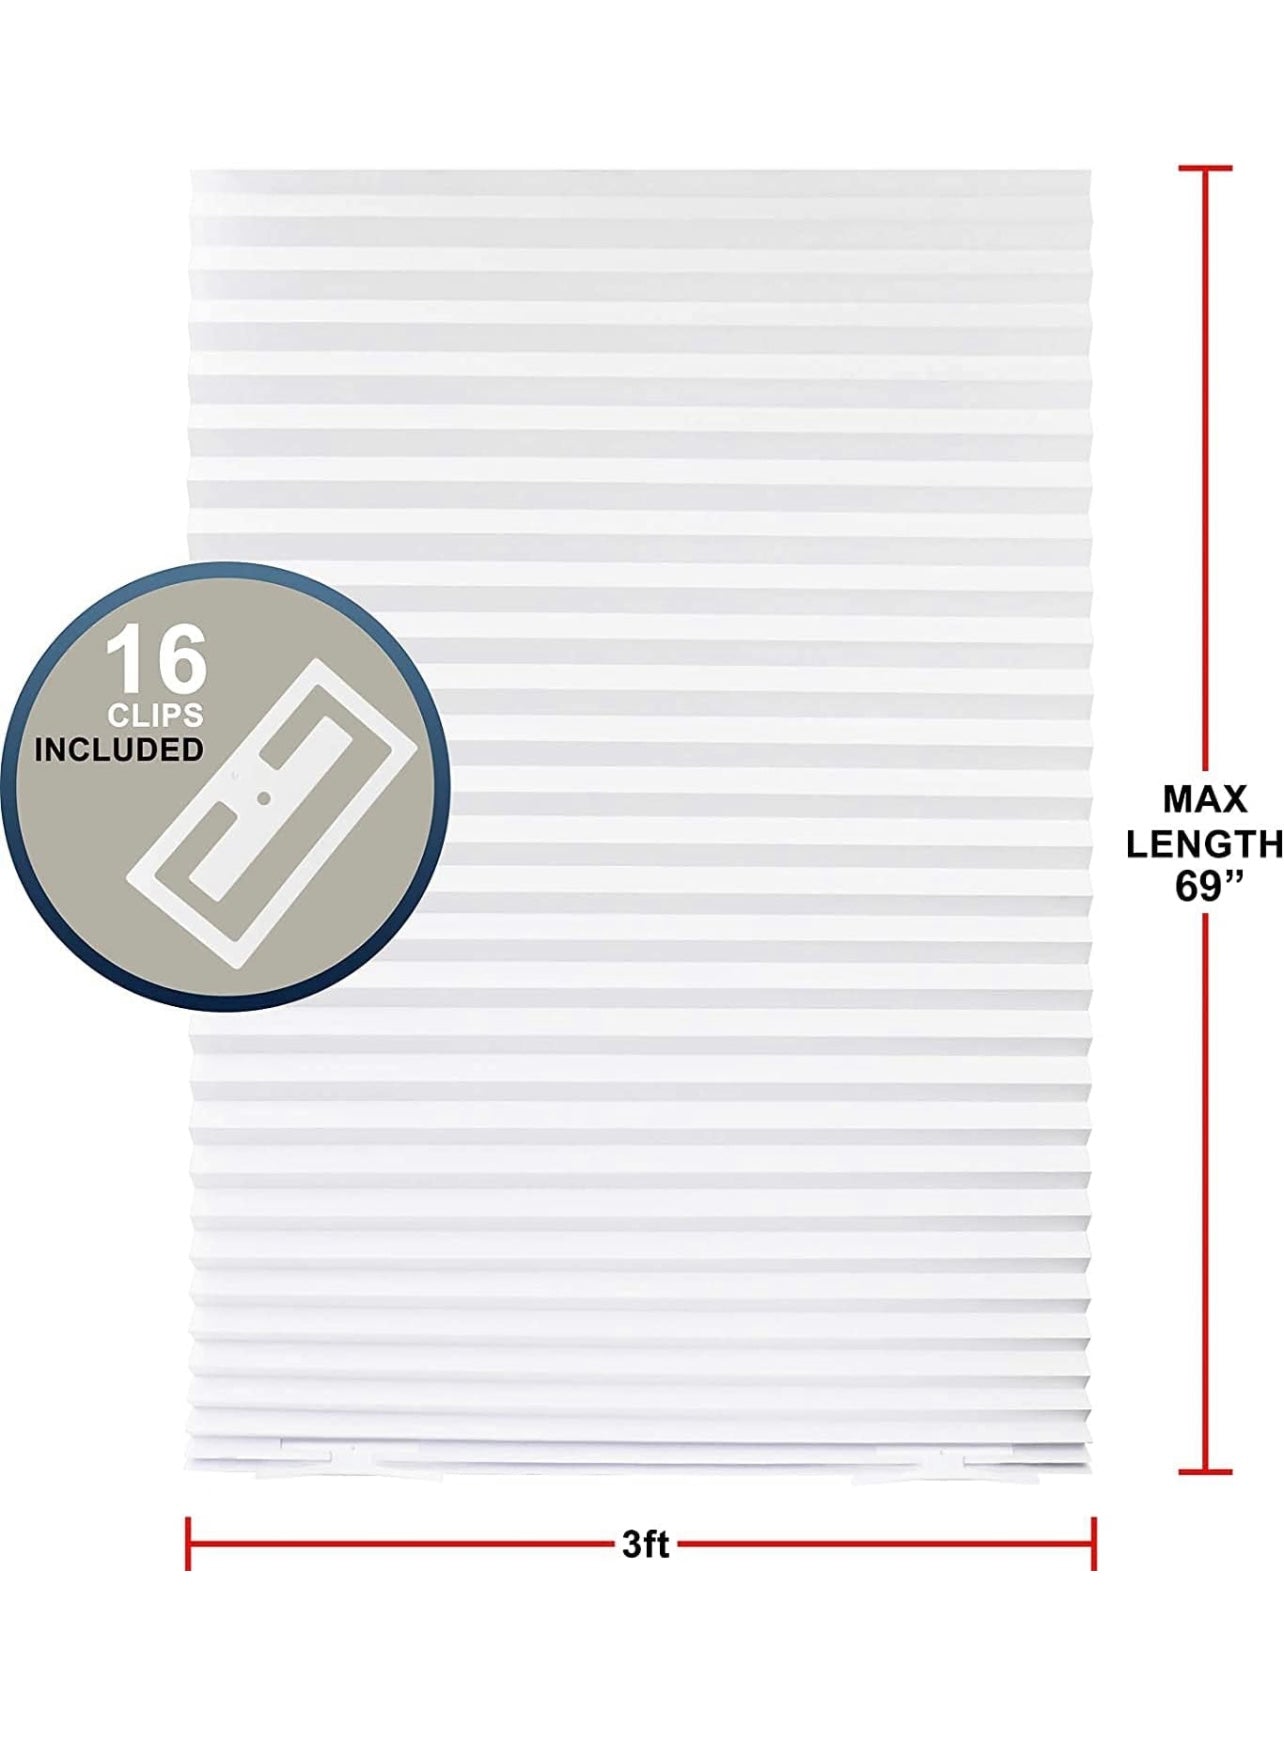 Mirrotek Pleated Window Paper Shades Light Filtering Blinds White 36" x 69" (Pack of 6 Temporary Blinds),MT1050